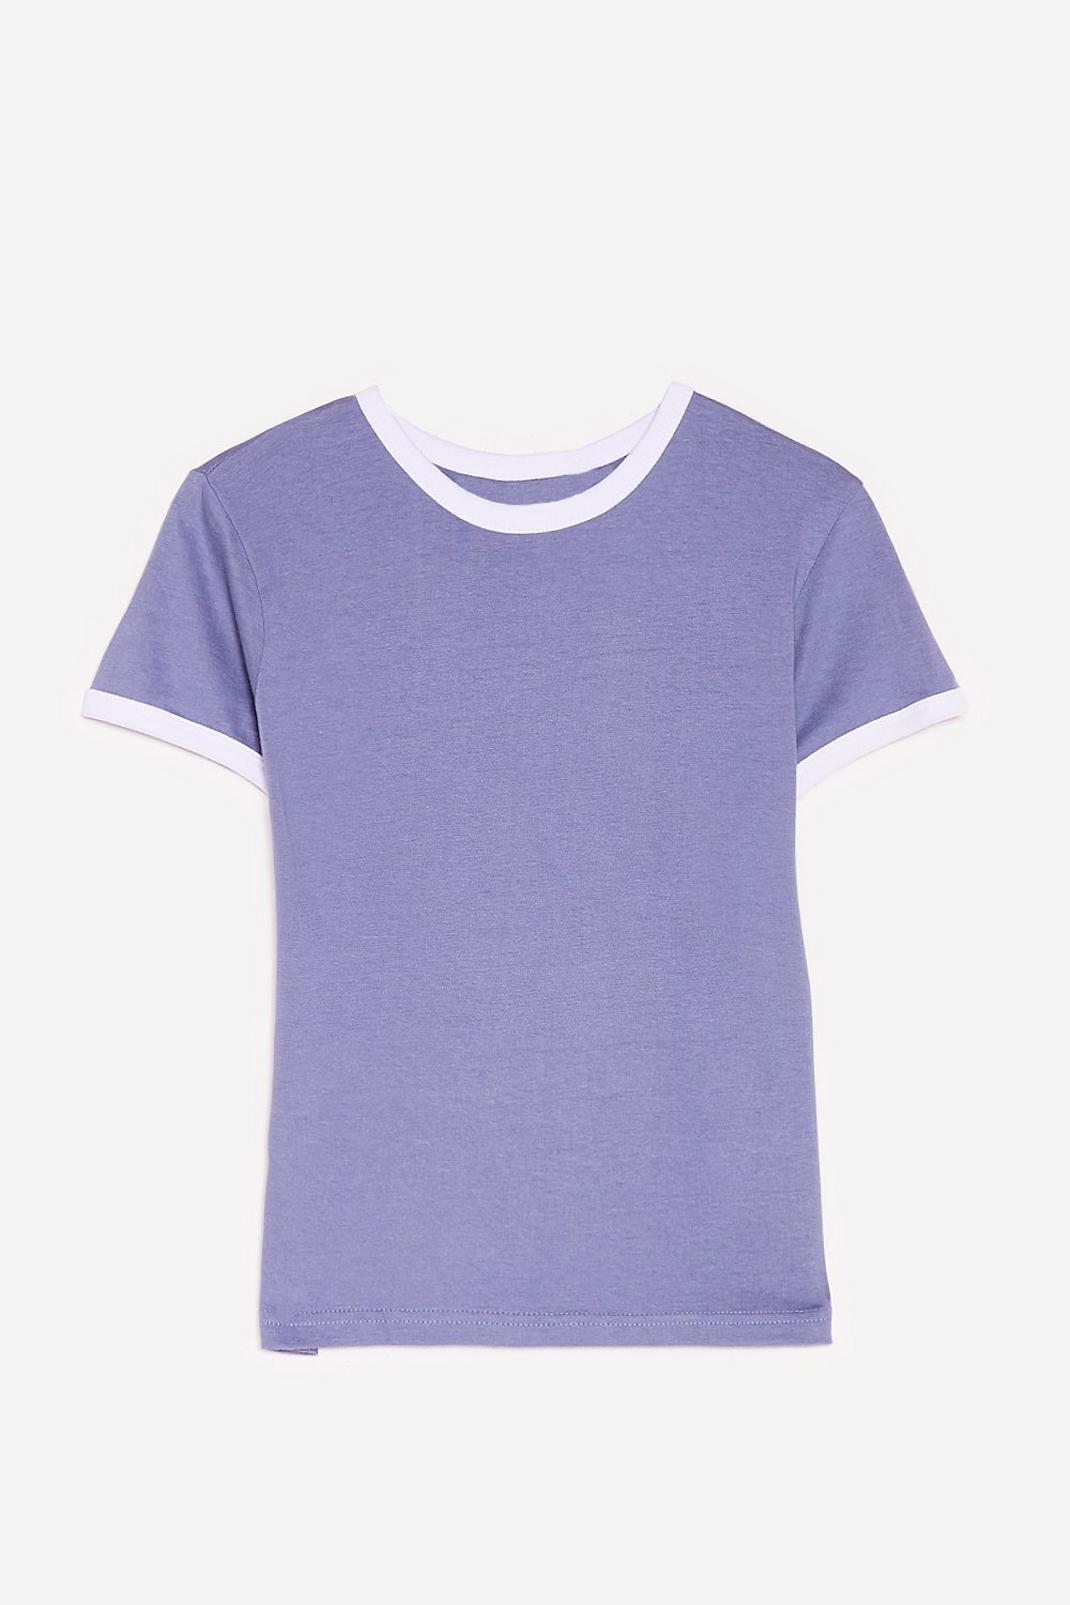 Slate Two Tone Relaxed Ringer T-Shirt image number 1